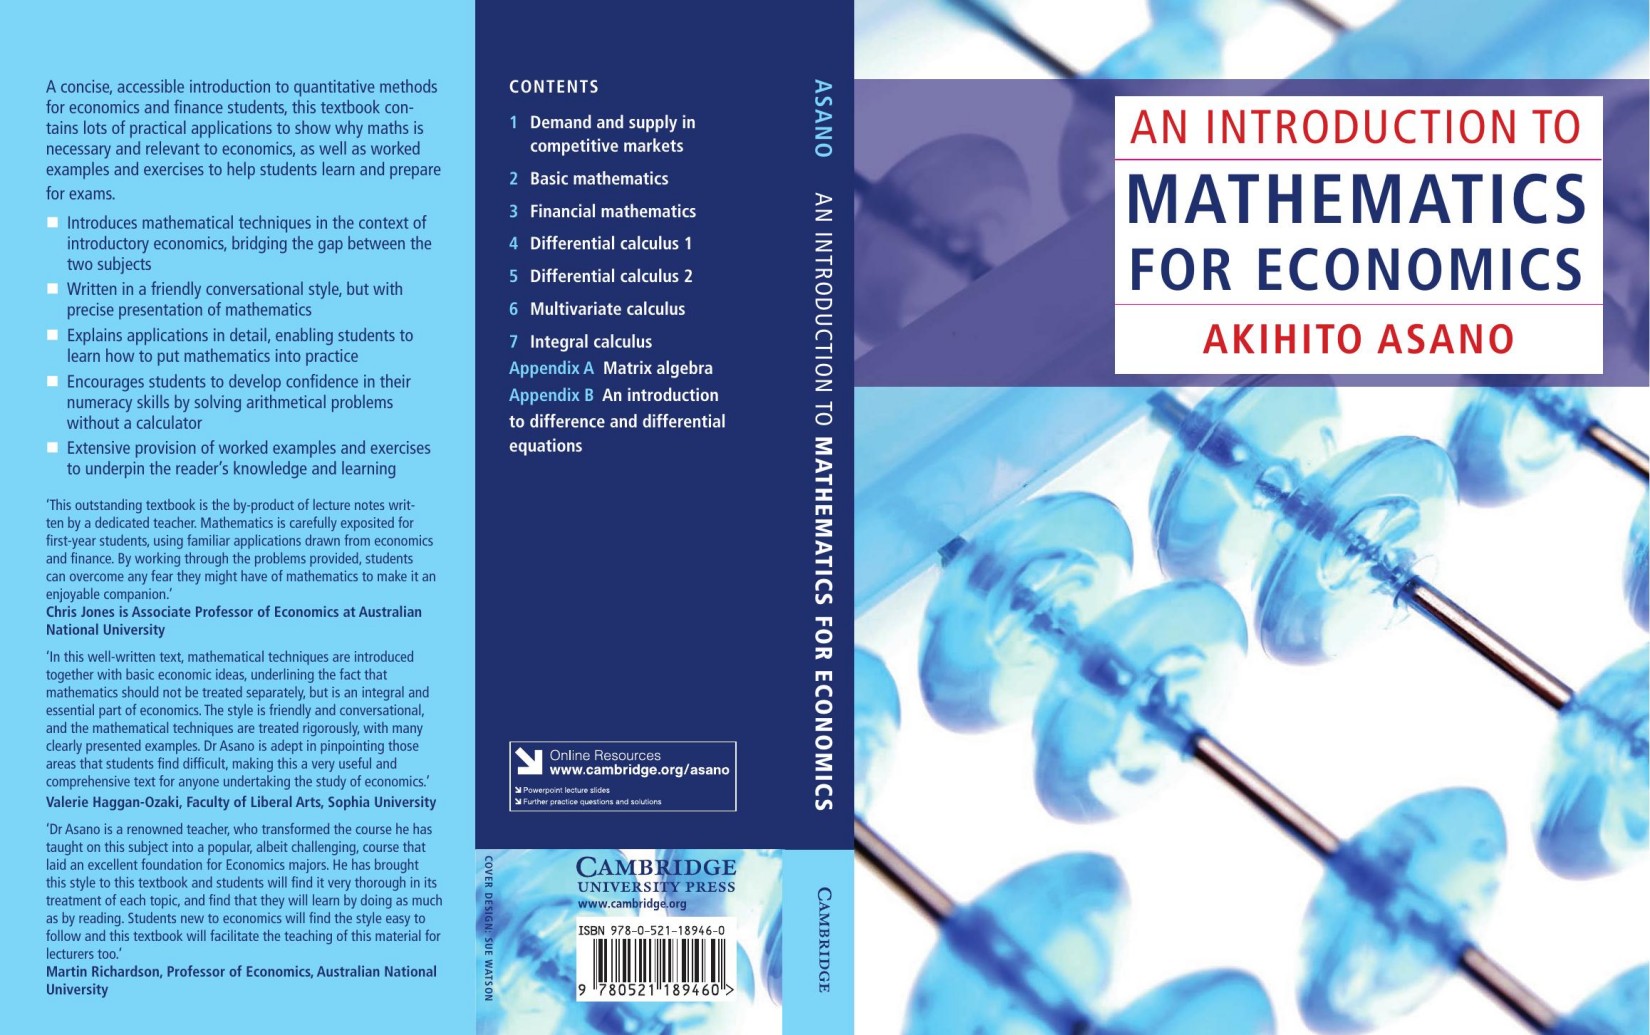 Asano A. An Introduction to Mathematics for Economics (draft, CUP, 2013)(ISBN 9781107007604)(285s).pdf